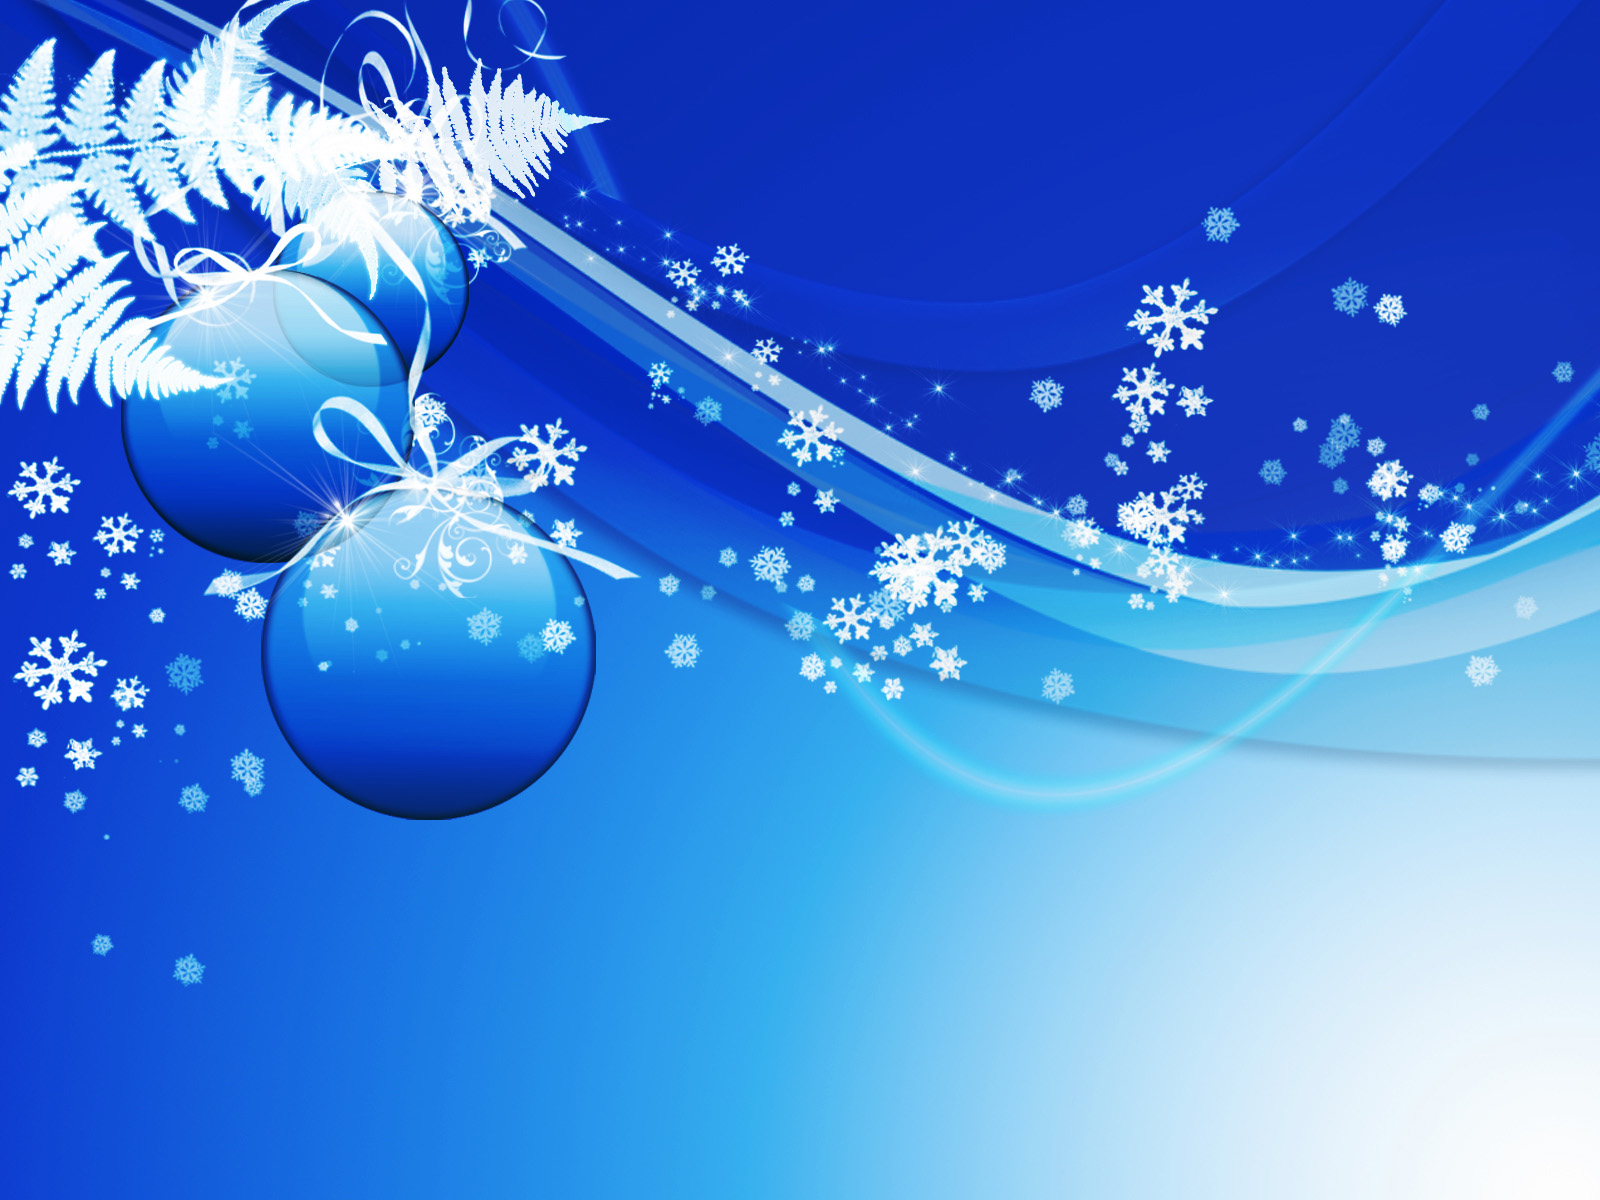 Christmas Holiday Backgrounds Wallpapers High Definition Wallpapers